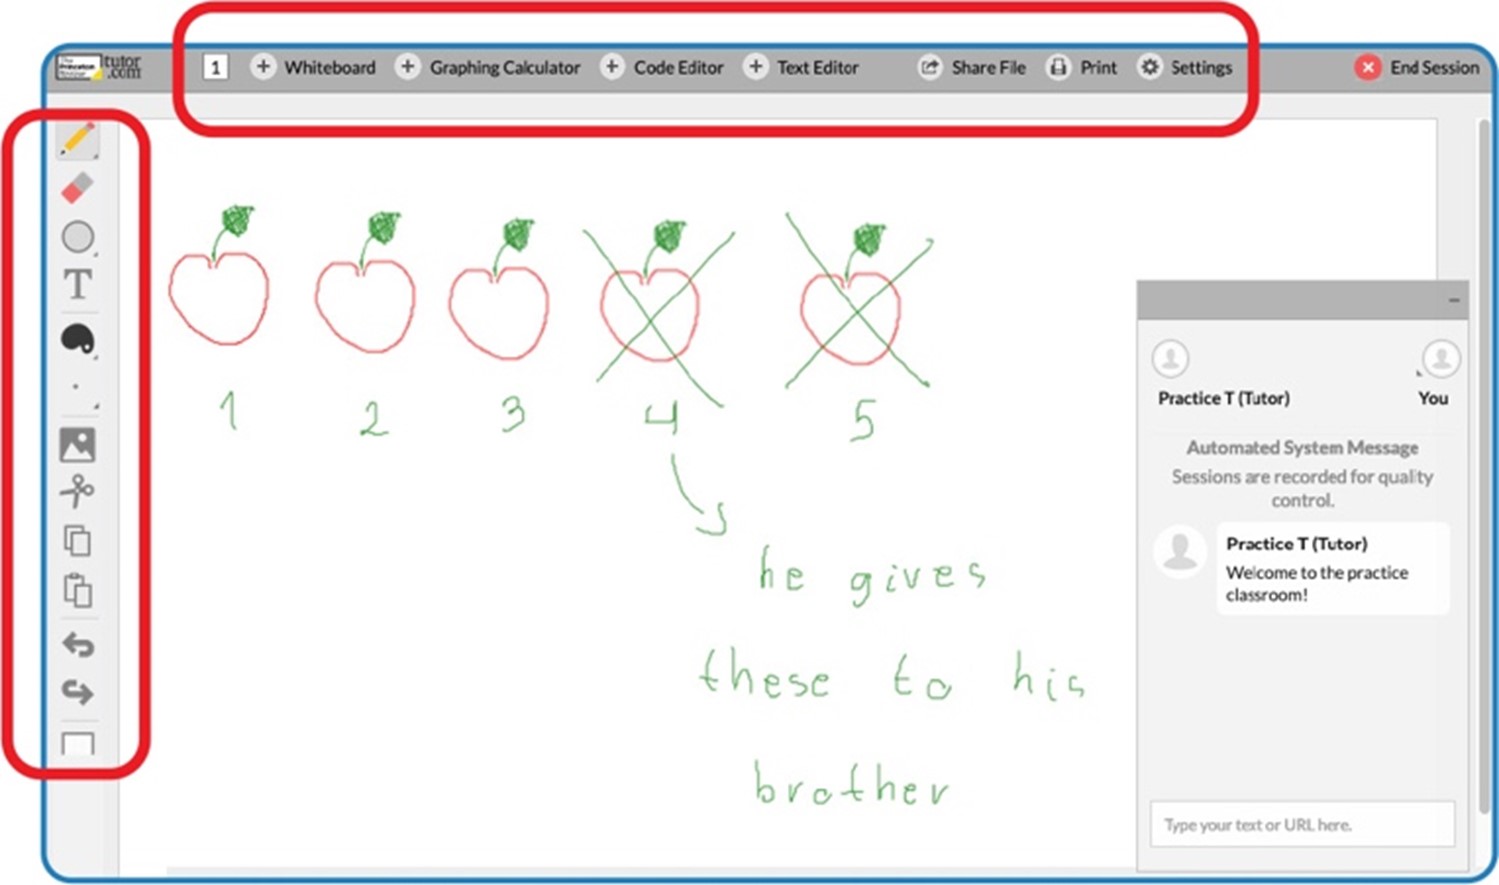 Screen shot of the whiteboard and tool buttons in a tutoring session.